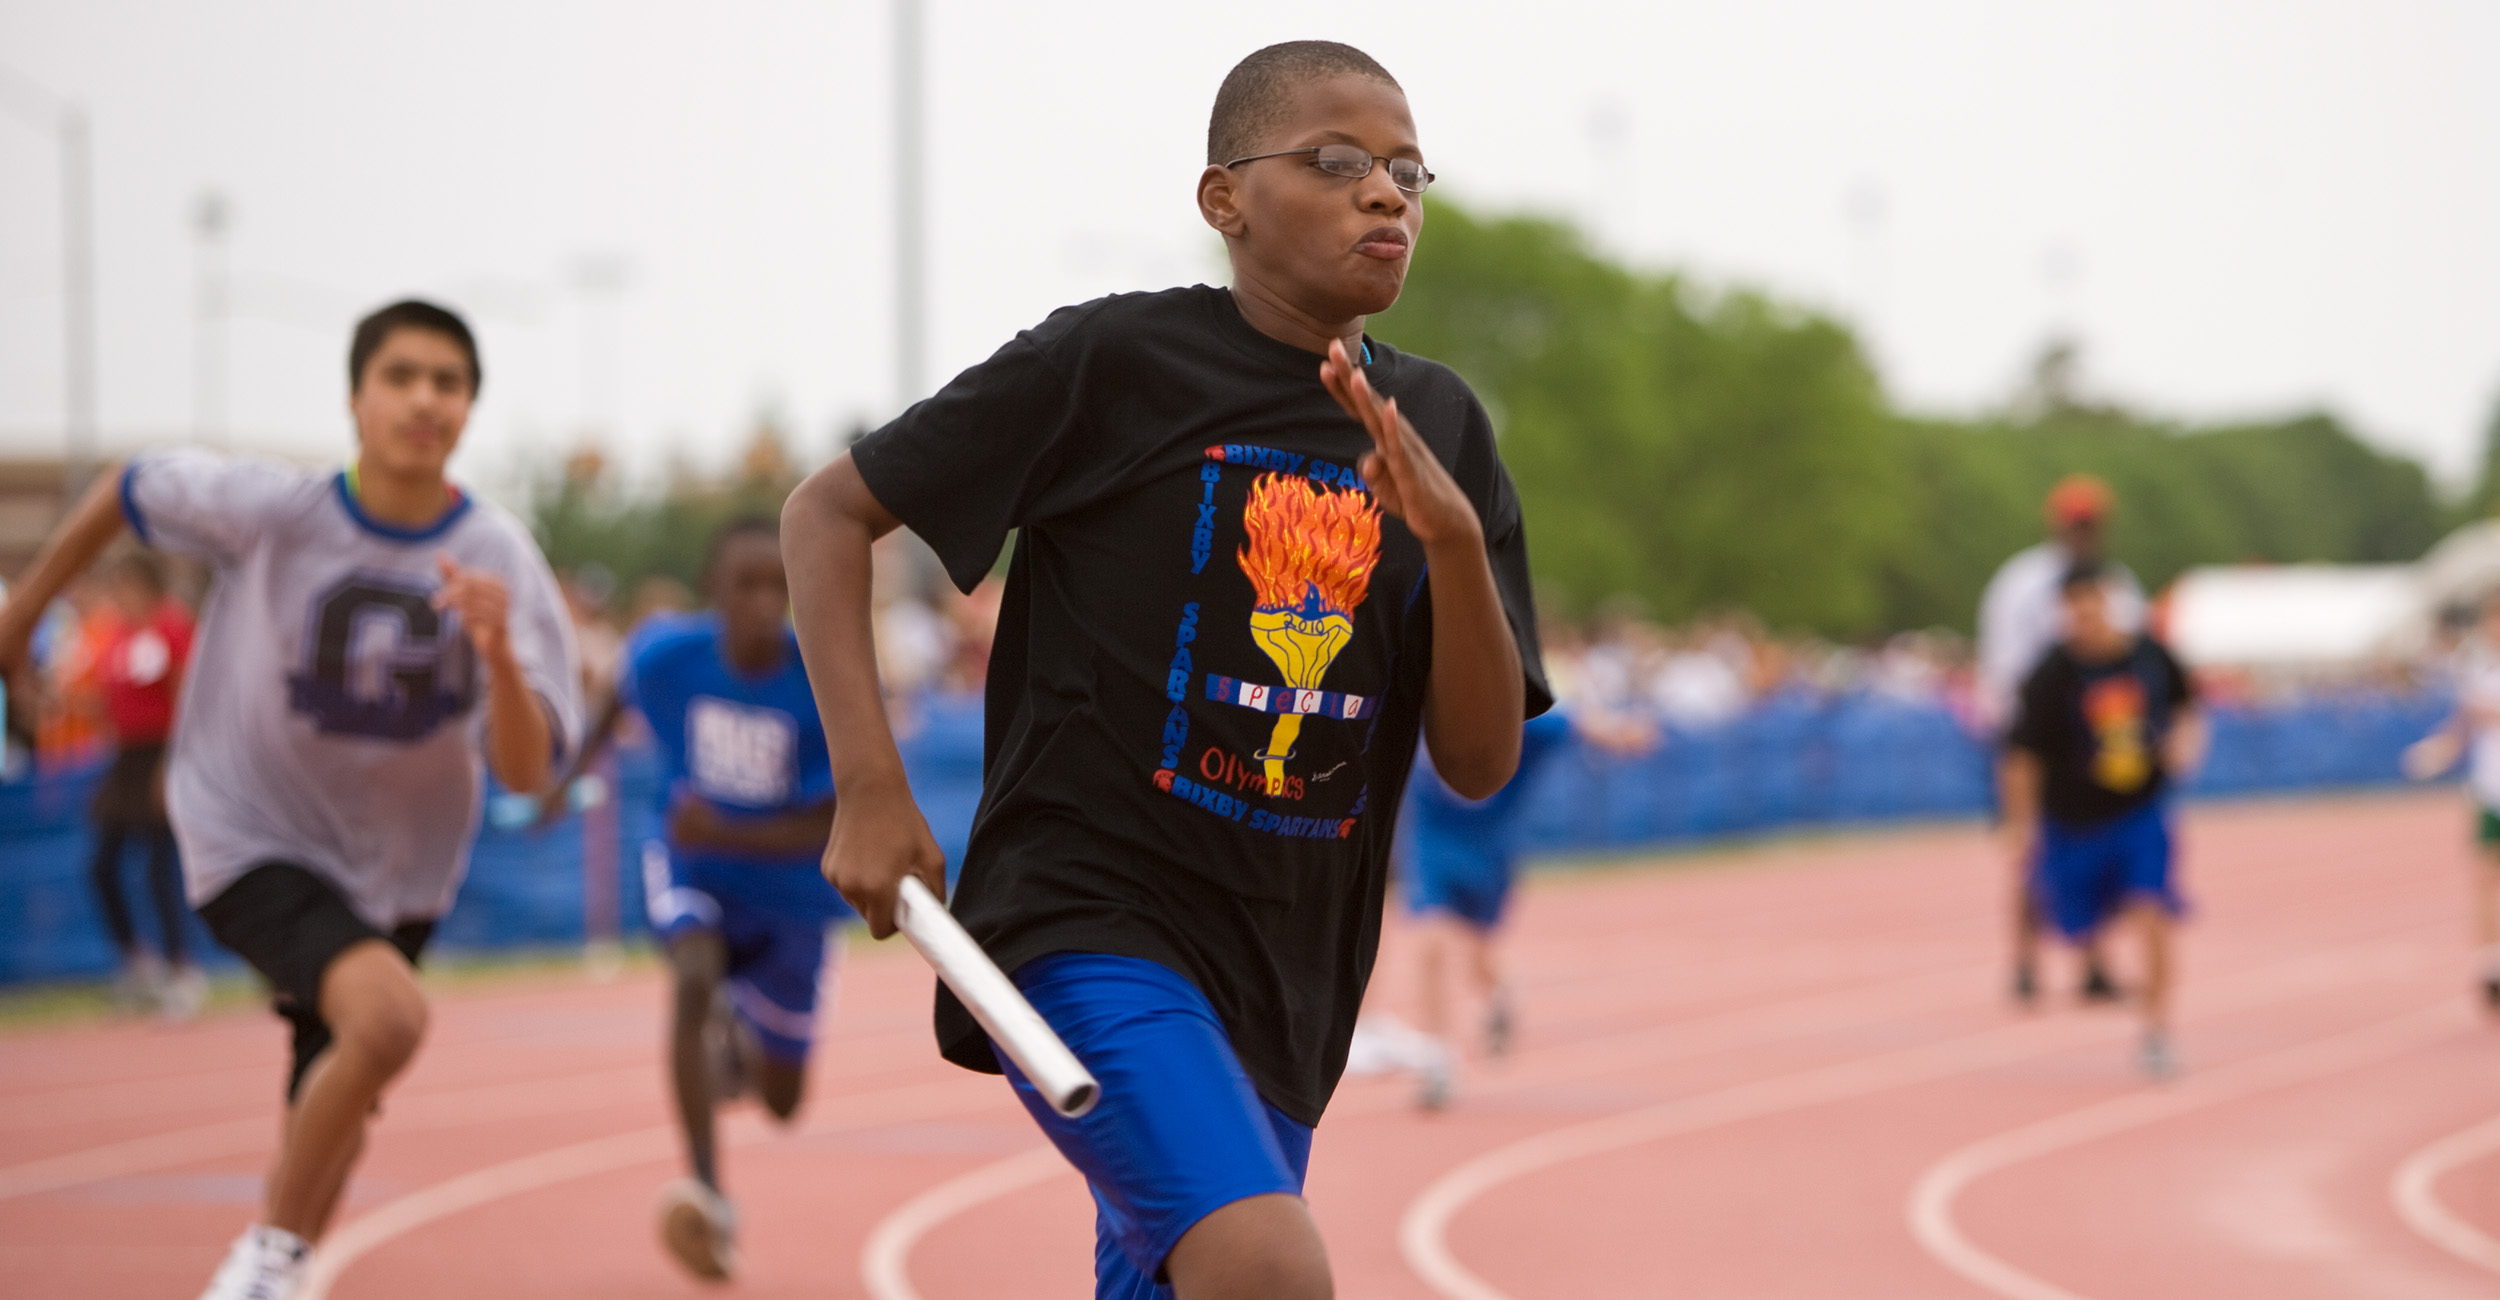 A special olympics athlete rounds the track at OSU running the relay race.